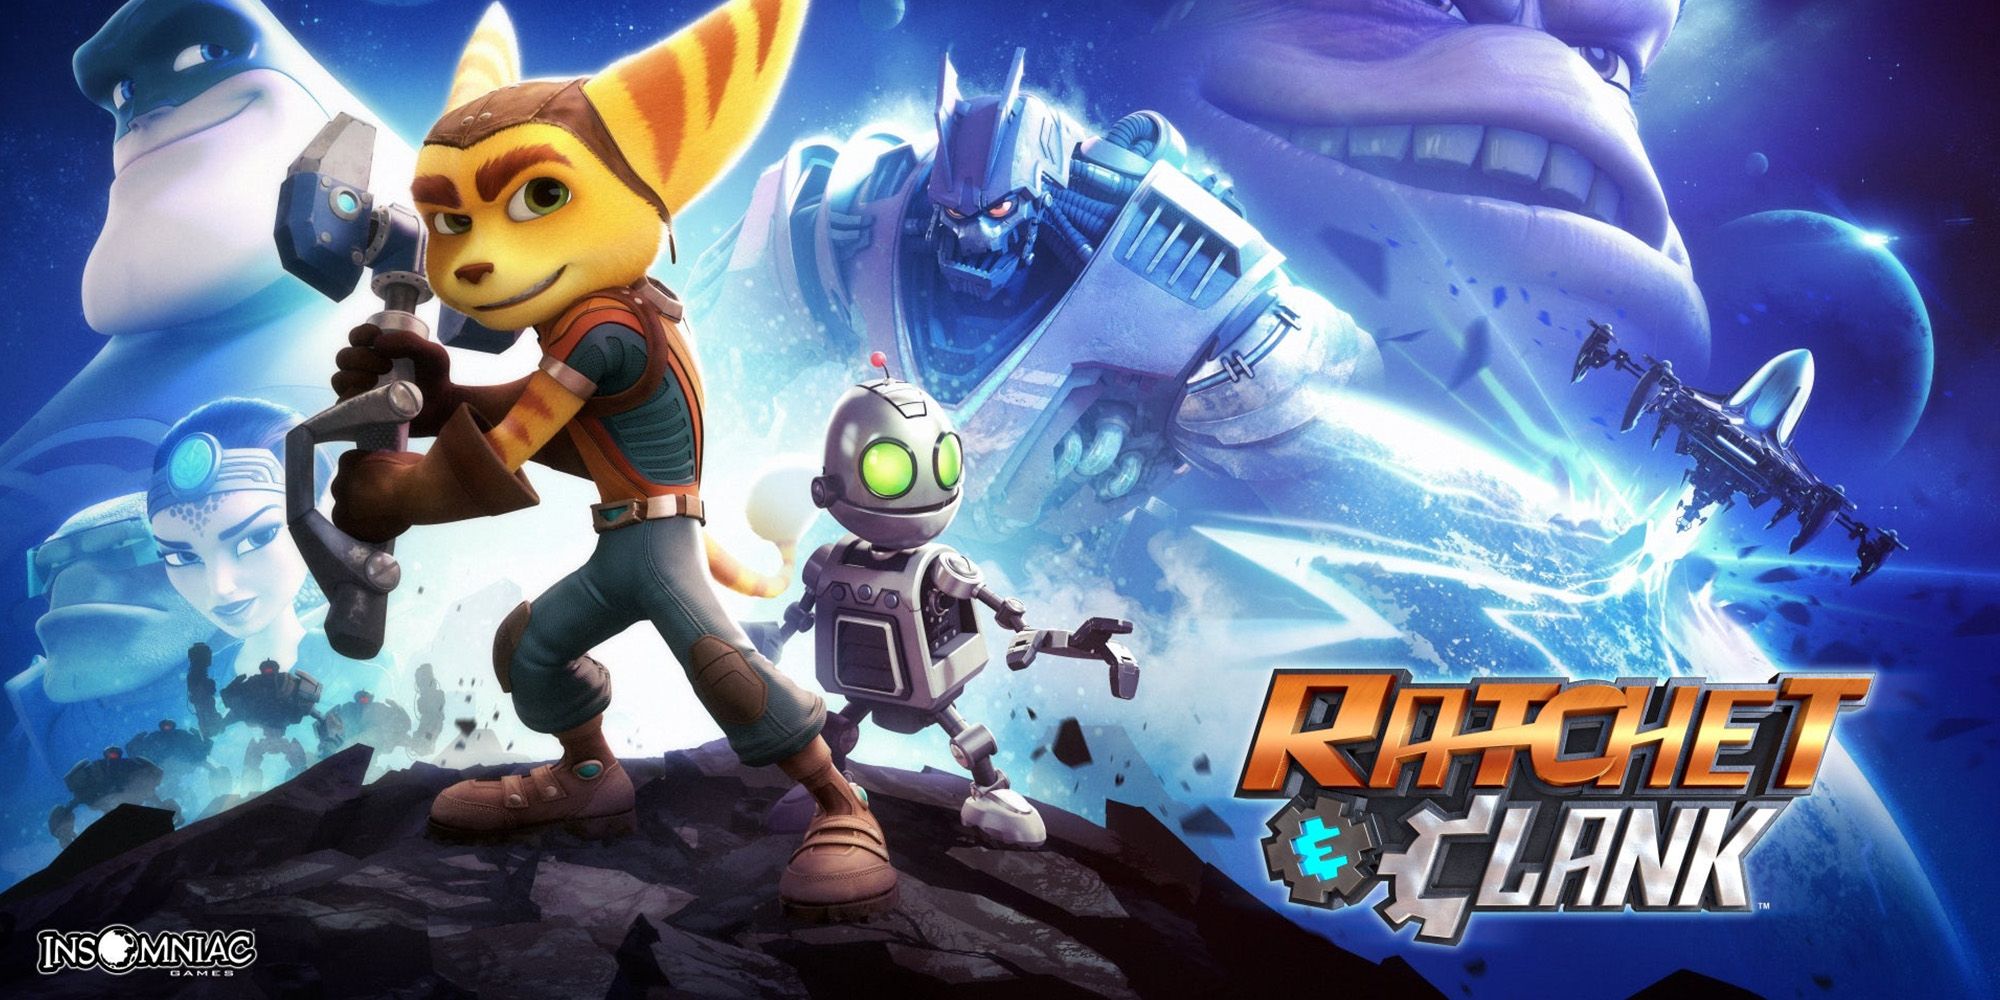 Ratchet and Clank 2016 cover art featuring Ratchet and Clank with other characters in the background. Image contains both game logo and Insomniac Games logo.